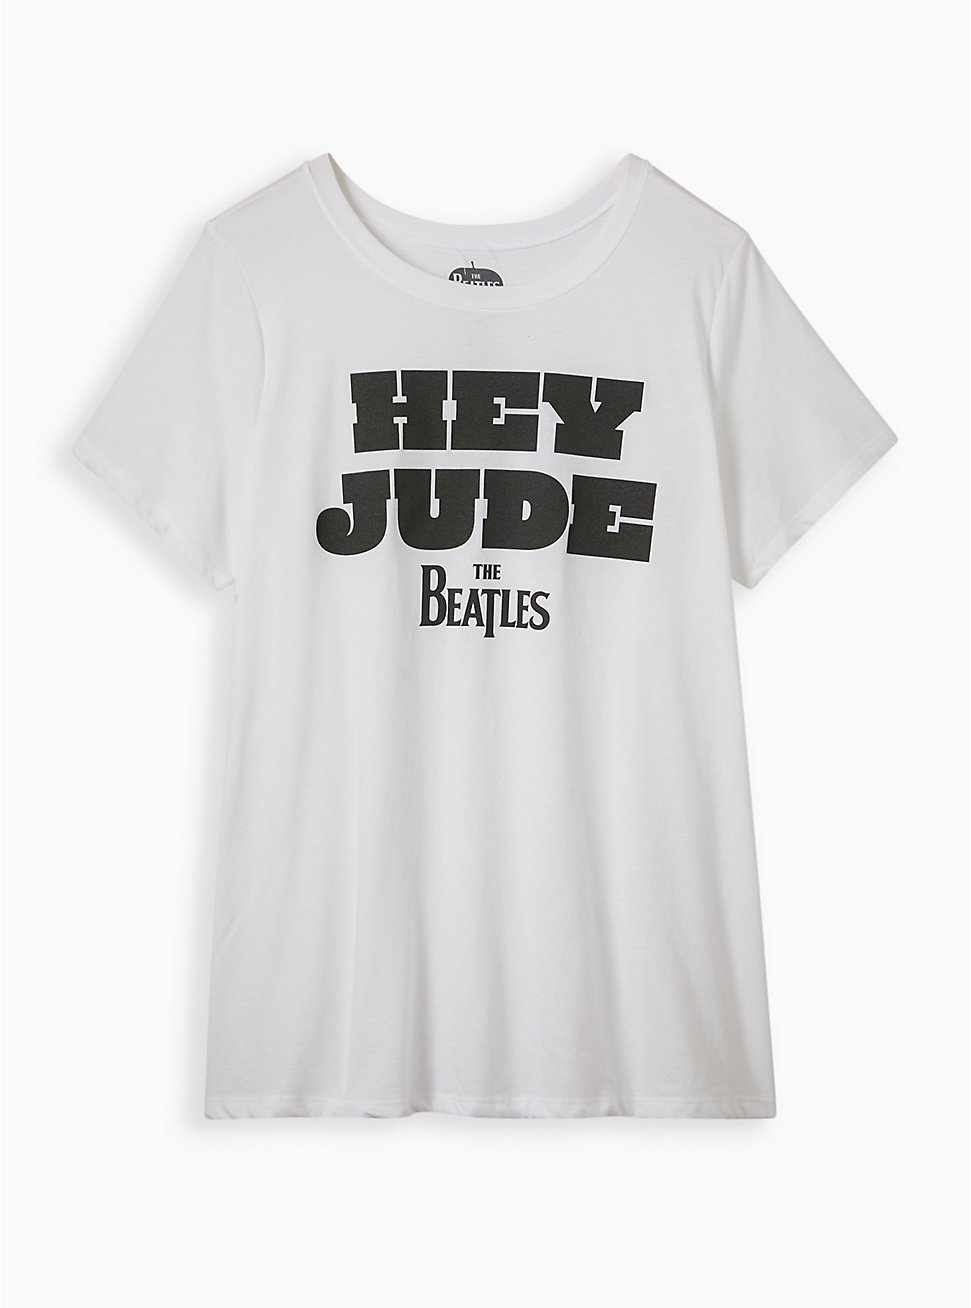 Plus Size The Beatles Slim Fit Crew Tee – Signature Jersey Hey Jude White, BRIGHT WHITE, hi-res